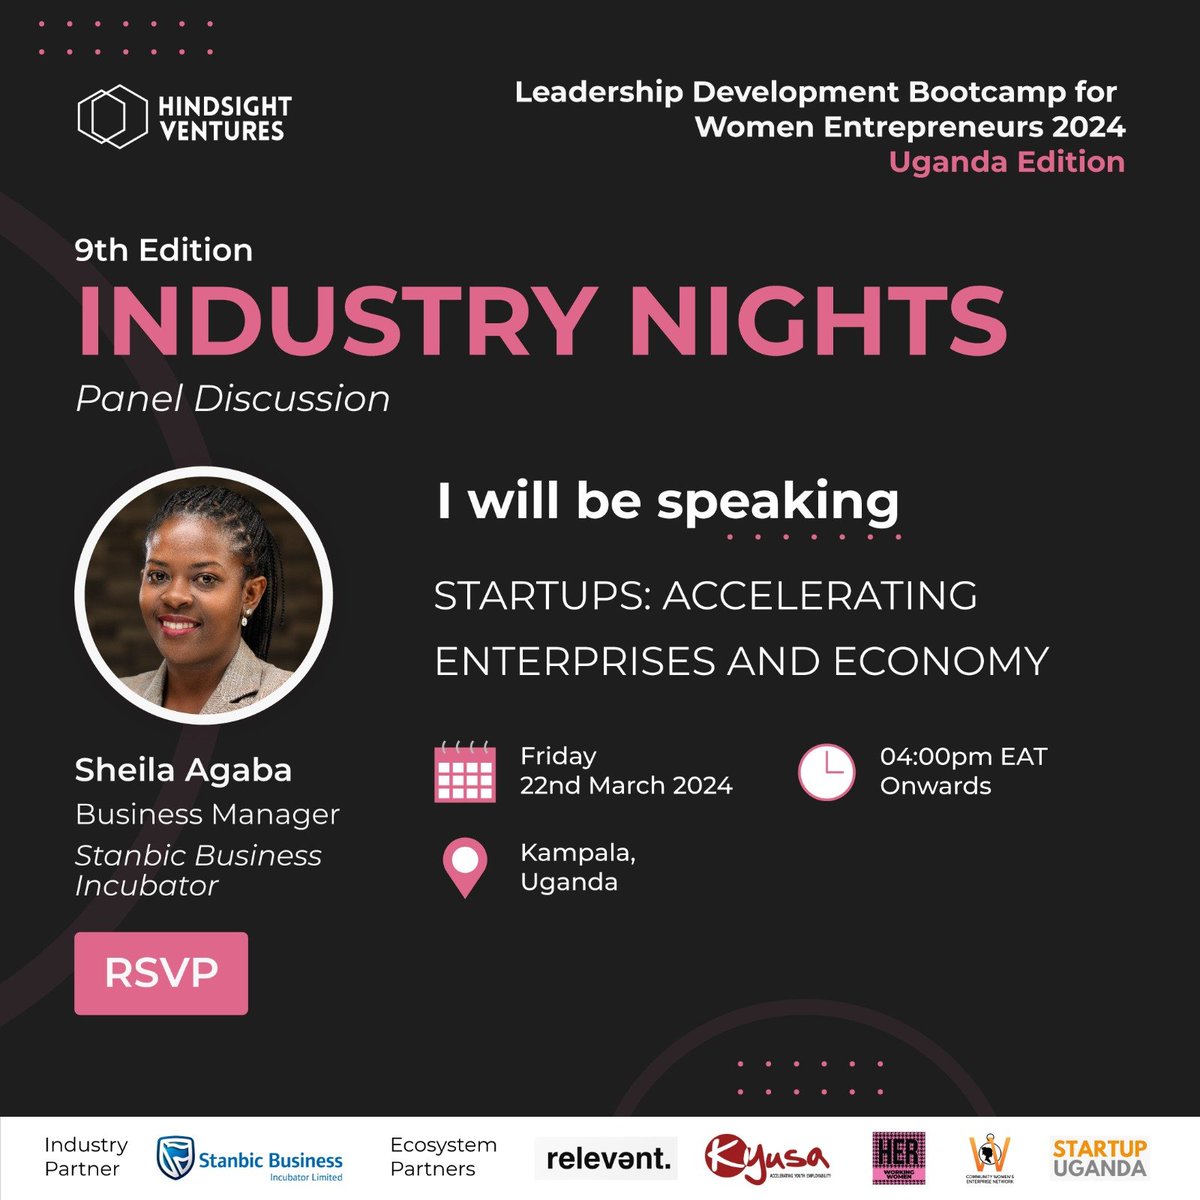 I am happy to share that I will be speaking at the 9th edition of Industry Nights being hosted in Kampala by @HSV_Africa in partnership with @SBIncubatorUG , Uganda's first official launch after its previous success in markets like; Kenya, Tanzania, & Ethiopia.